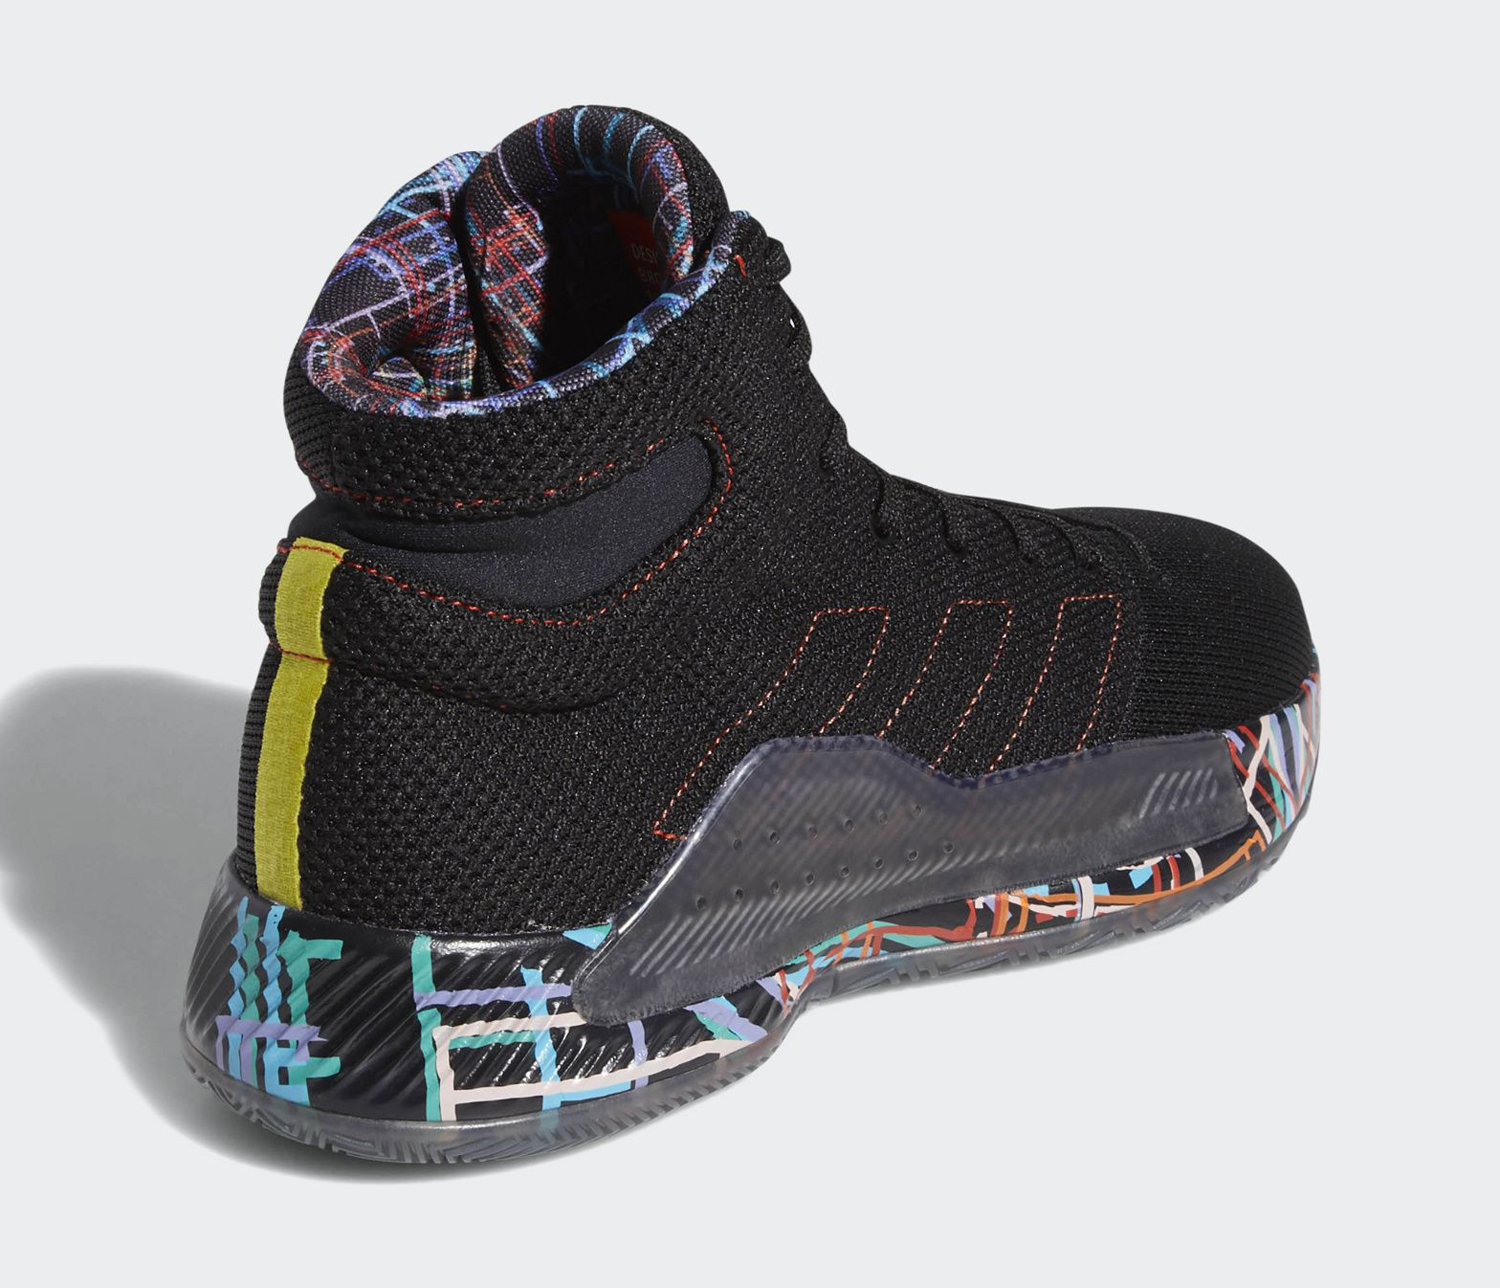 pro bounce madness 2019 shoes